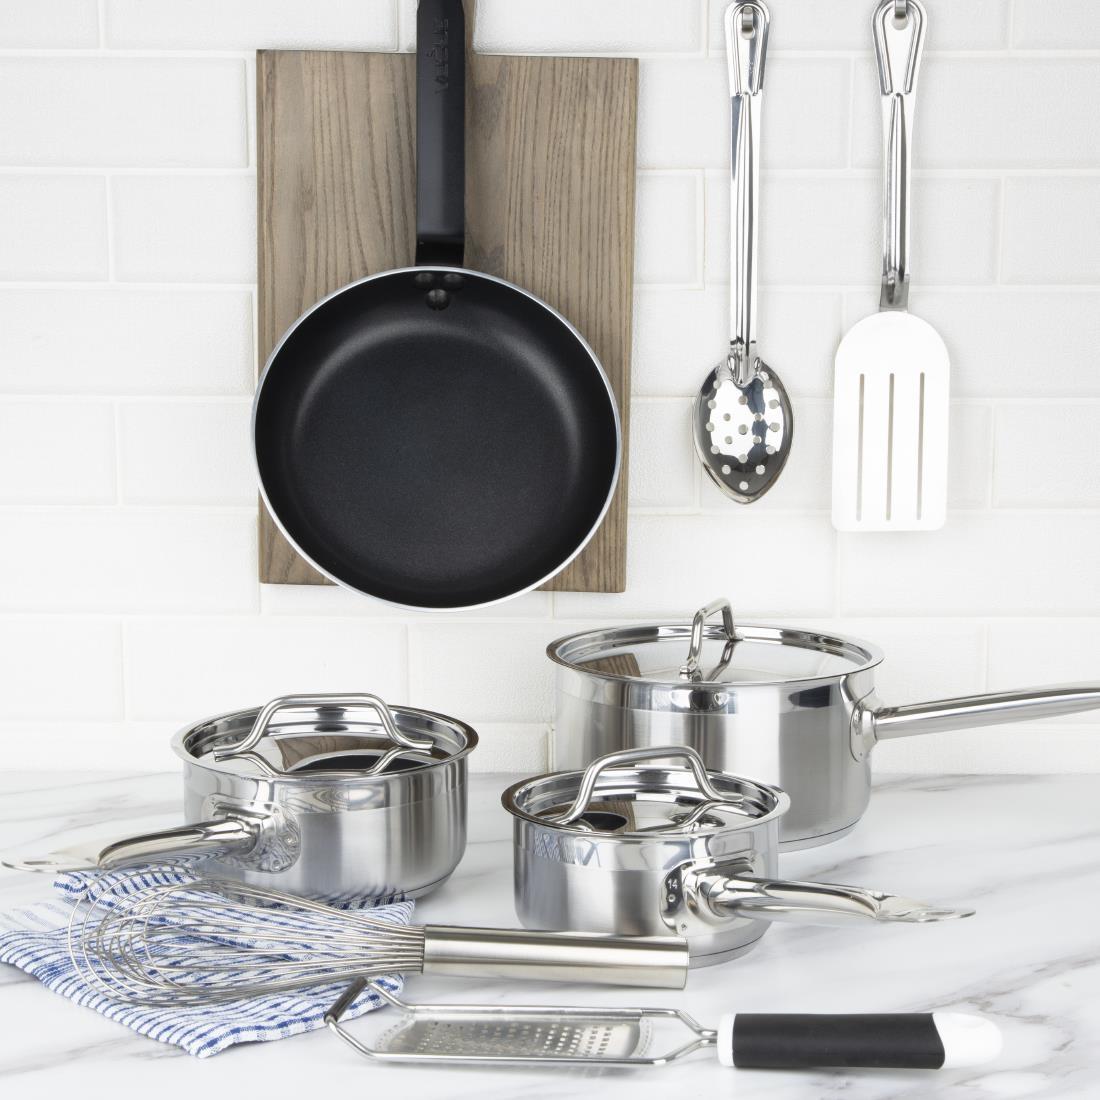 Nisbets Essentials Cook Like A Pro 4-Piece Saucepan and Frying Pan Set